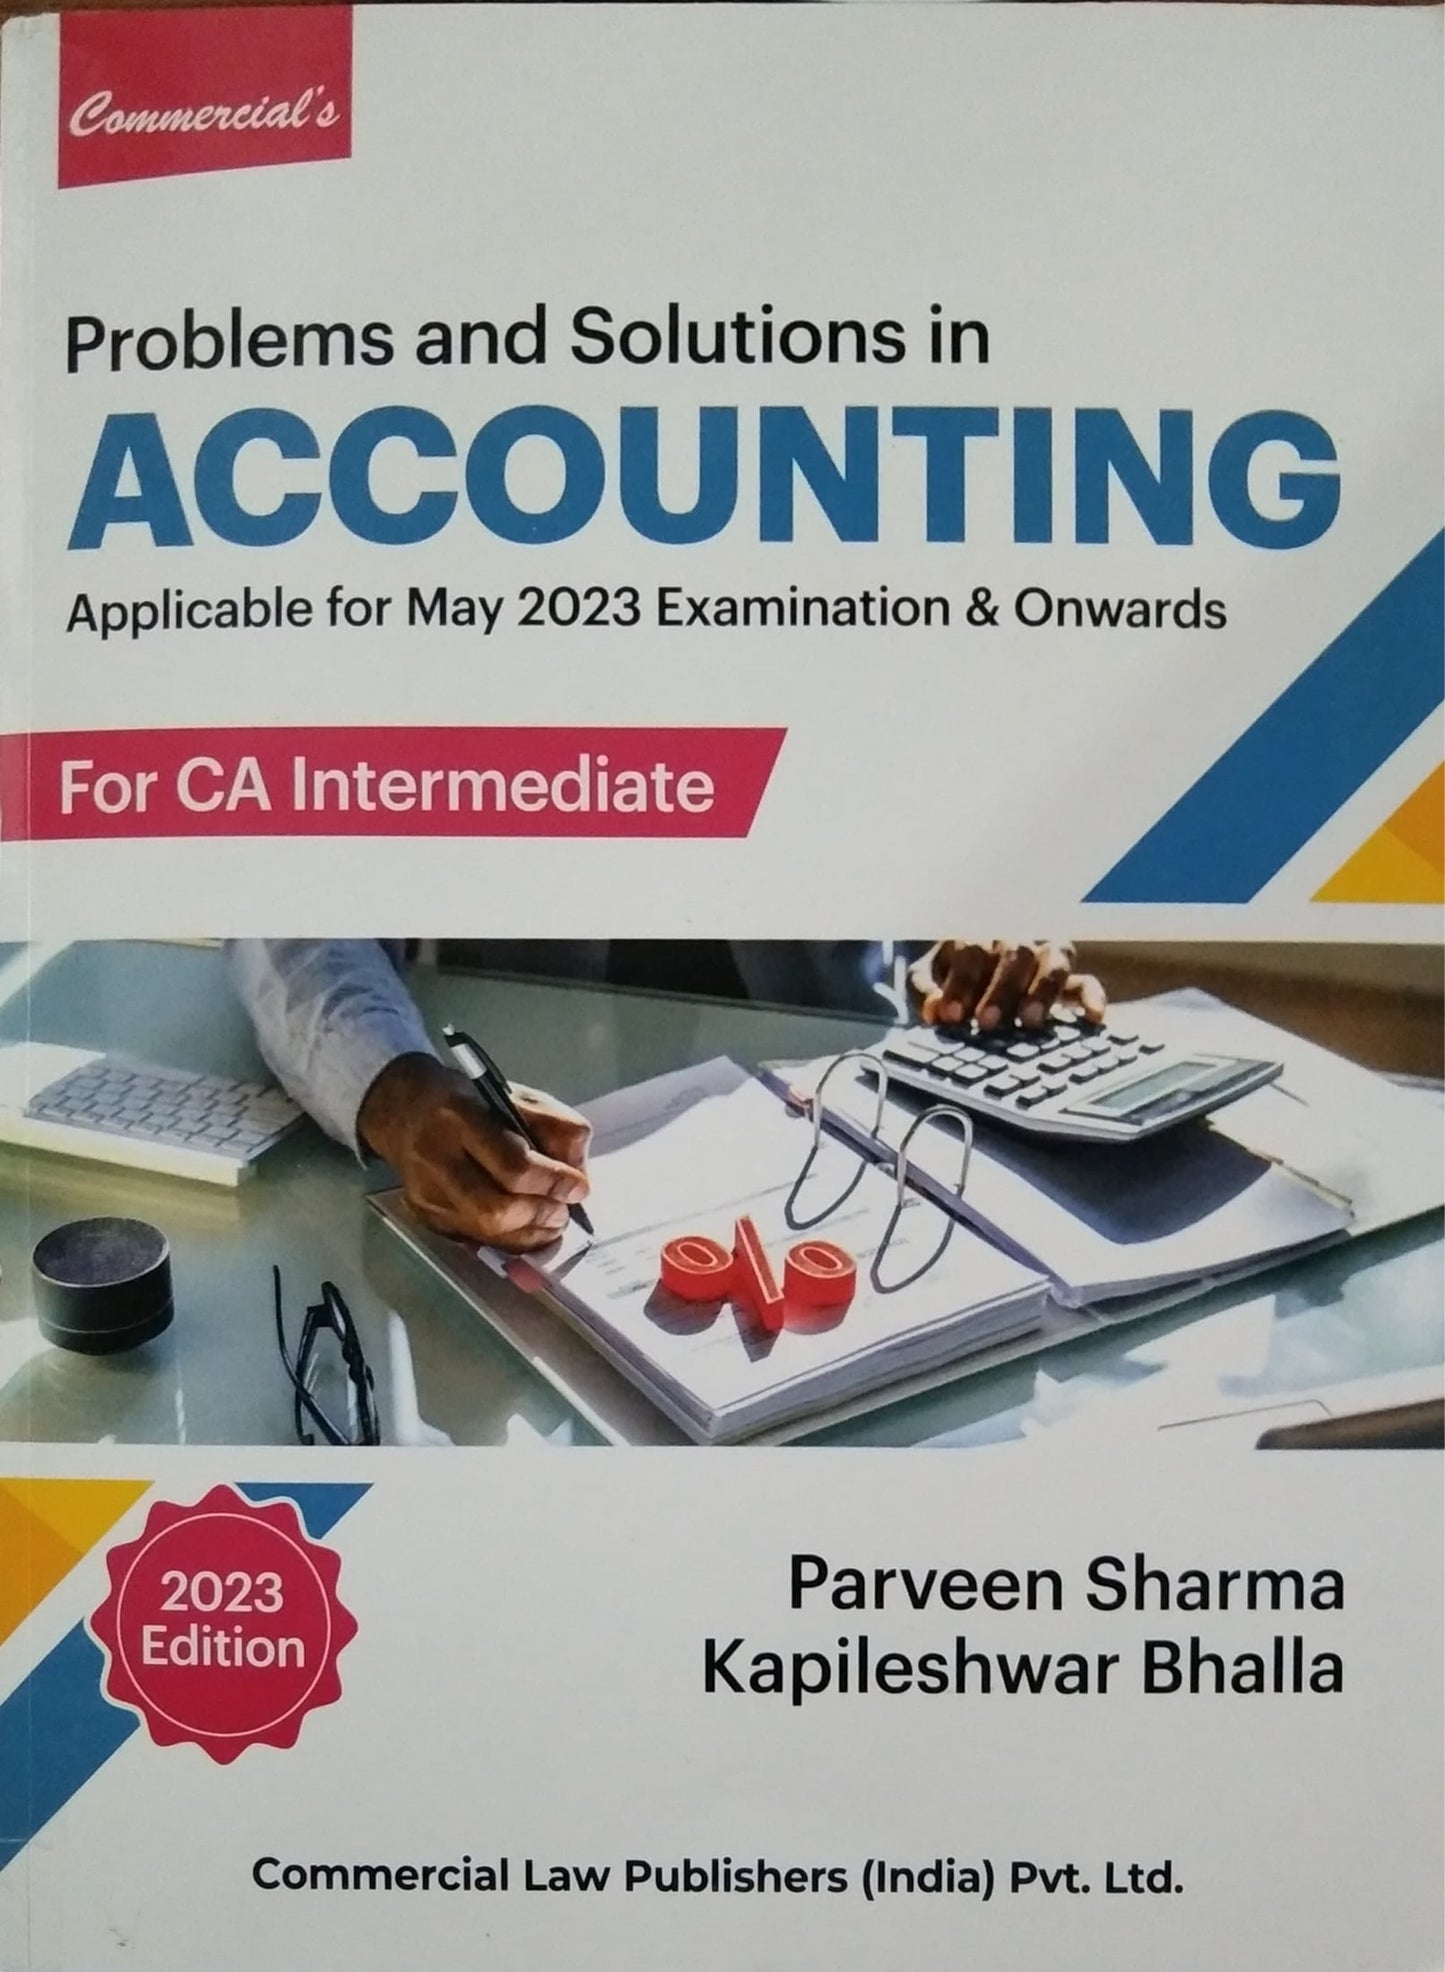 Promblems and Solutions in Accounting